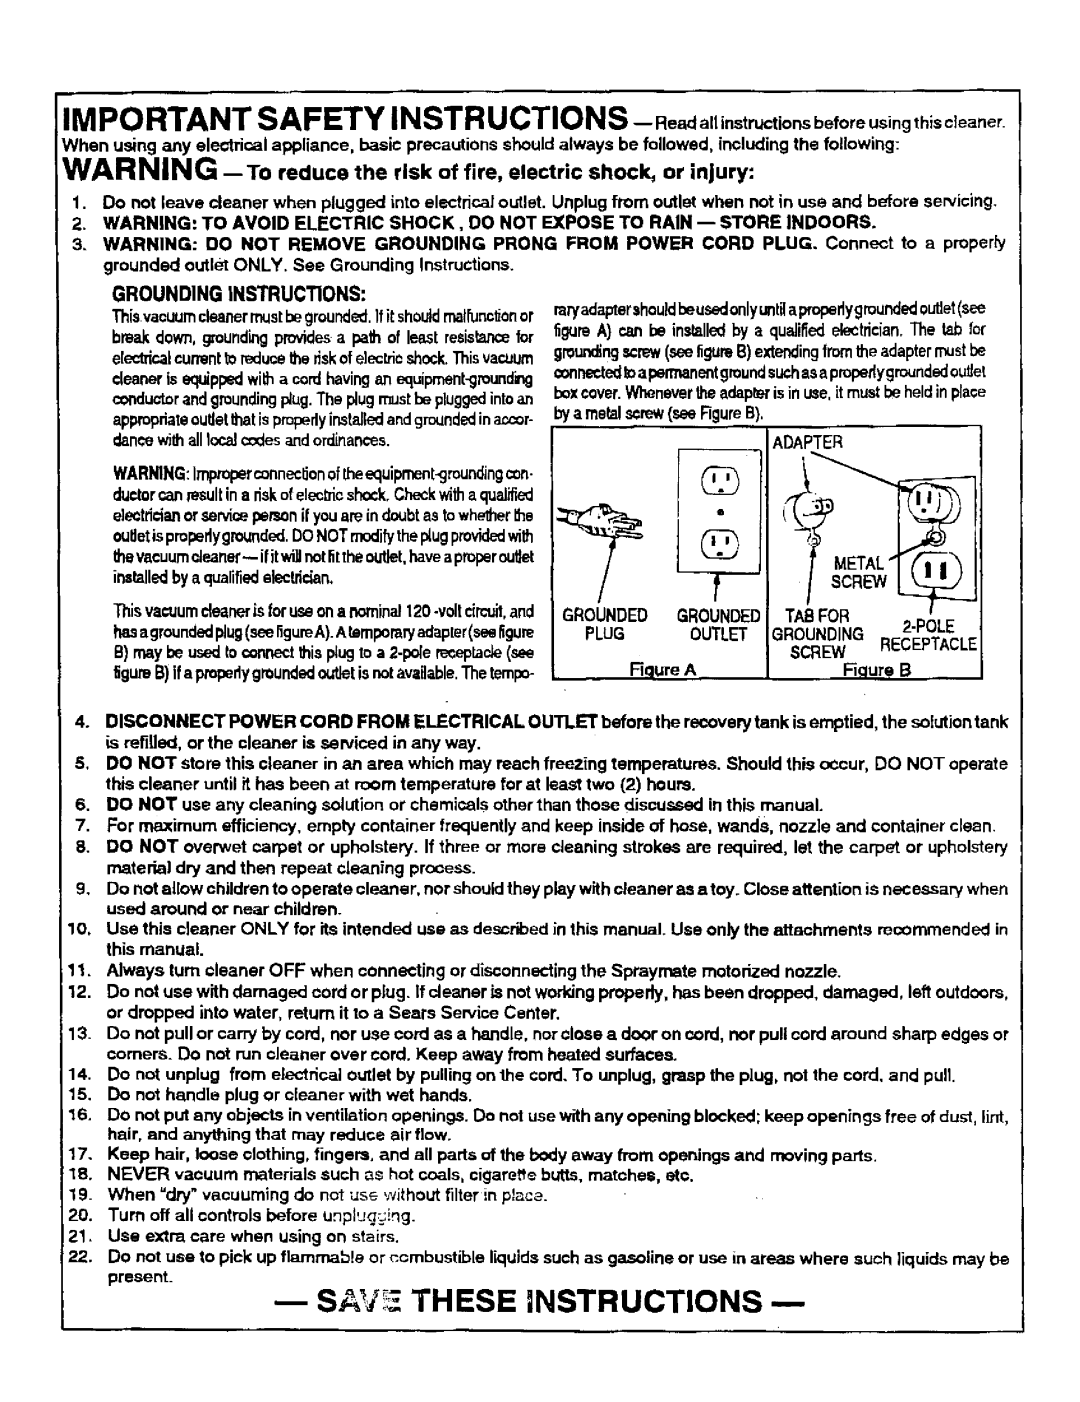 Sears 175.867029 owner manual SAV E.THESE iNSTRUCTIONS, I sca 